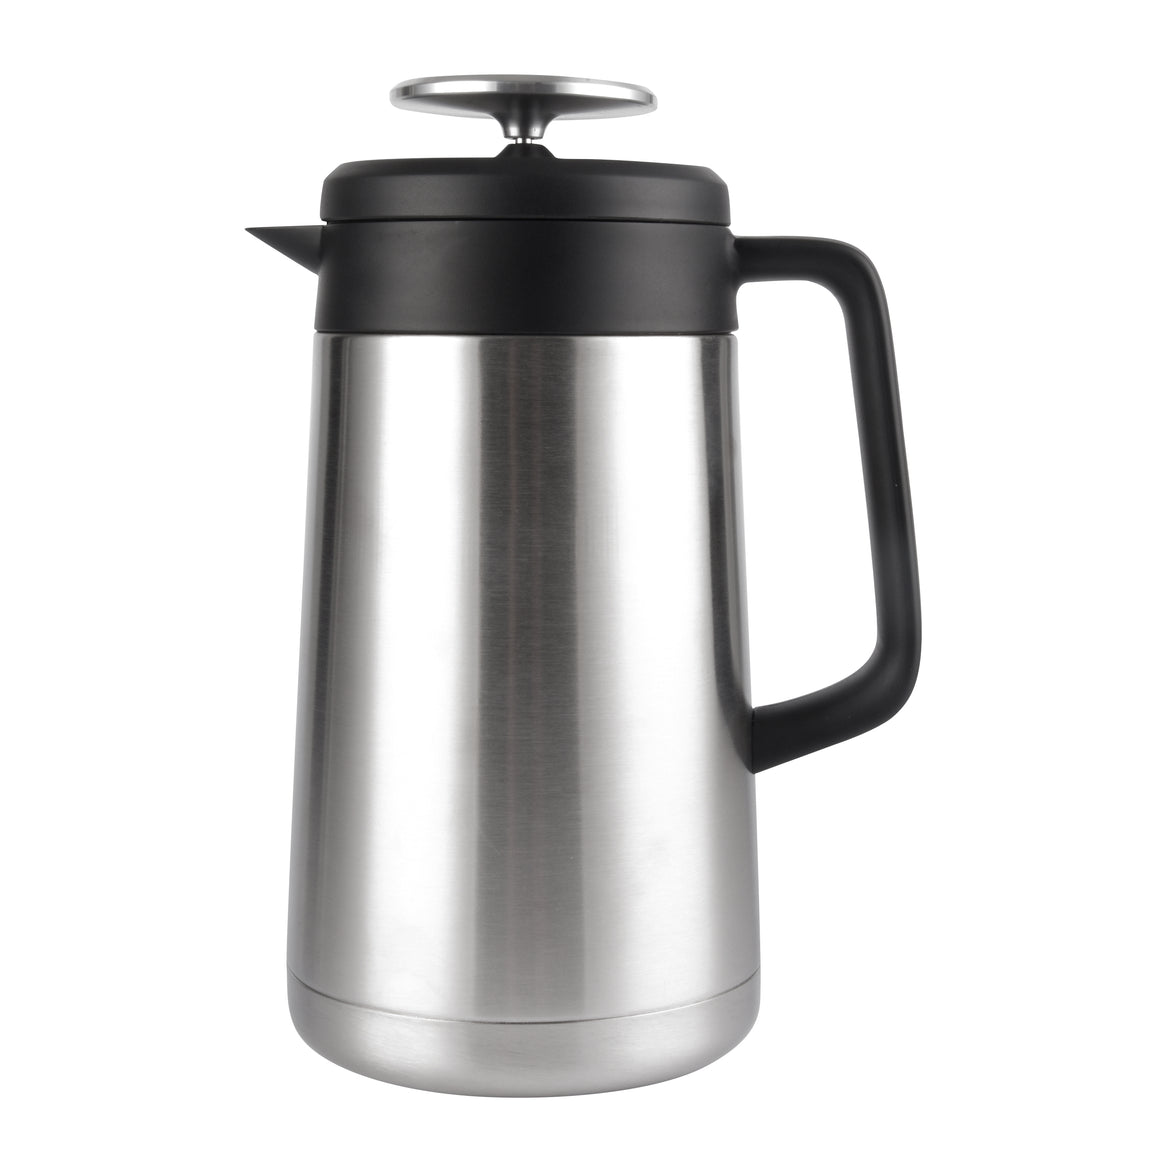 Stainless Steel French Press Coffee Maker (34 oz / 1 Liter)